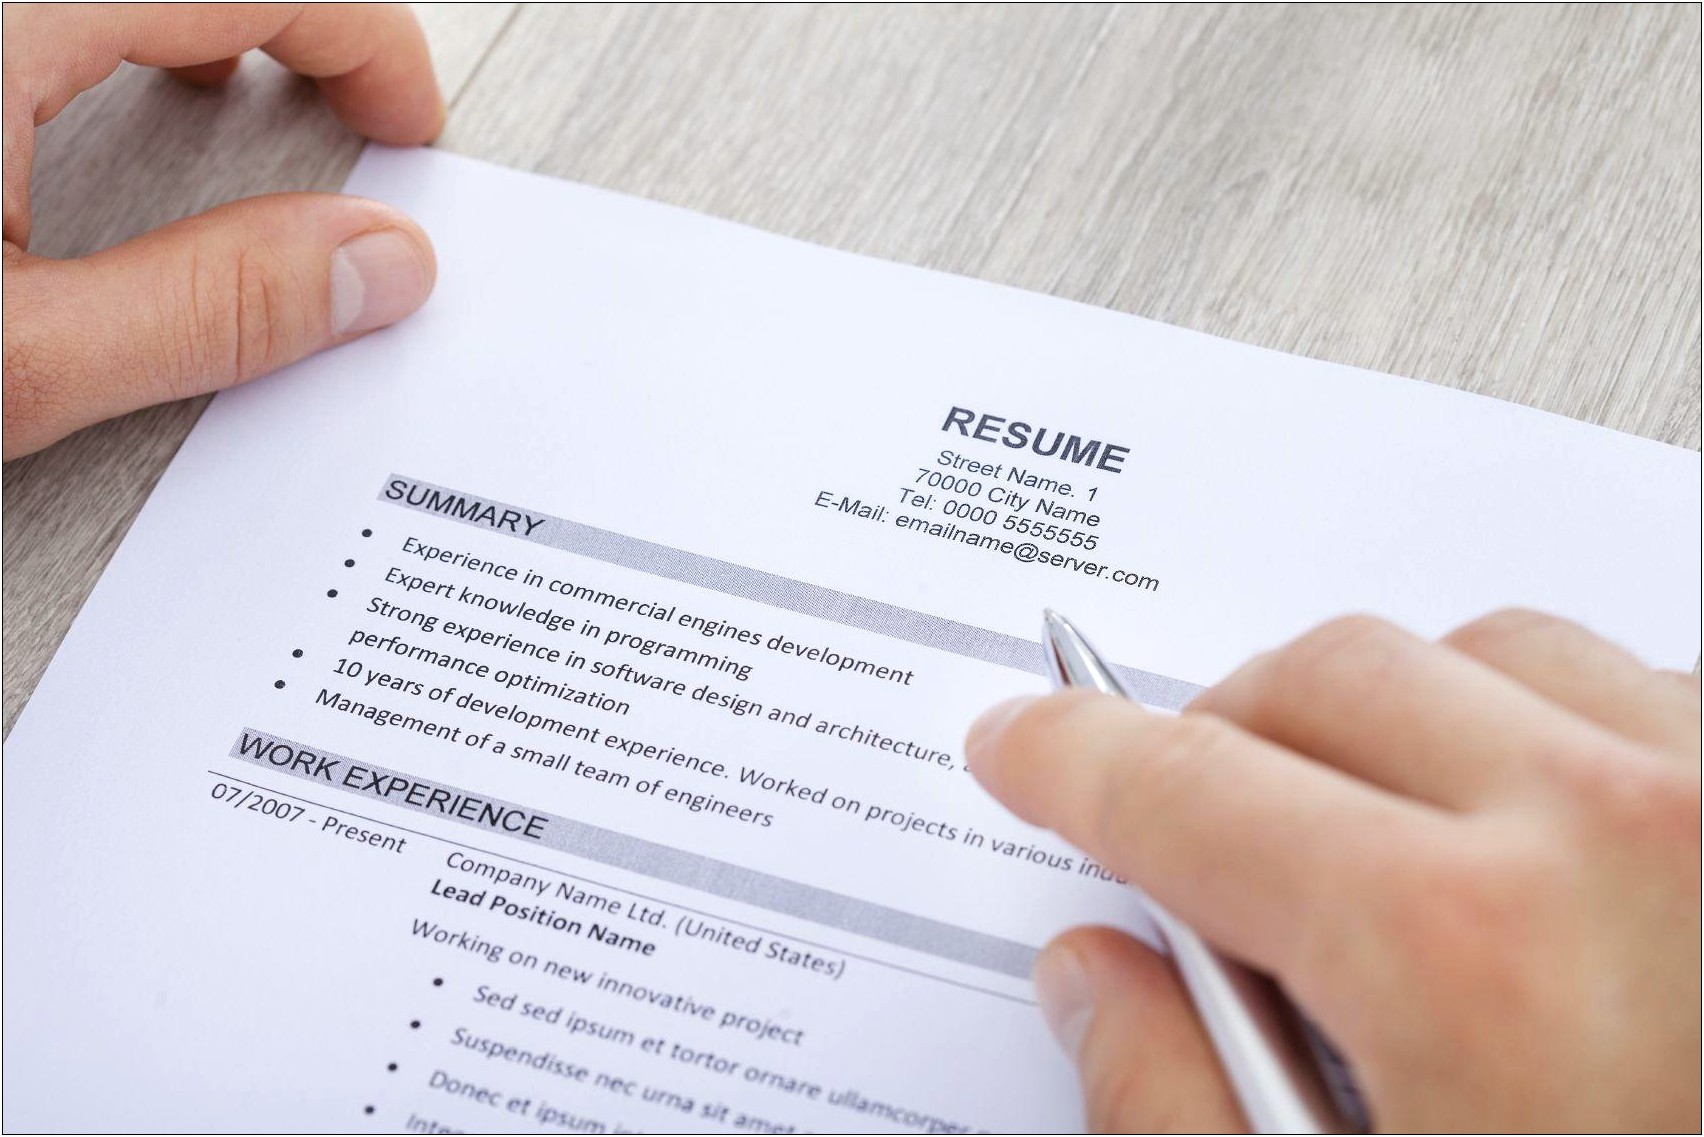 Sample Executive Summary For Resumes